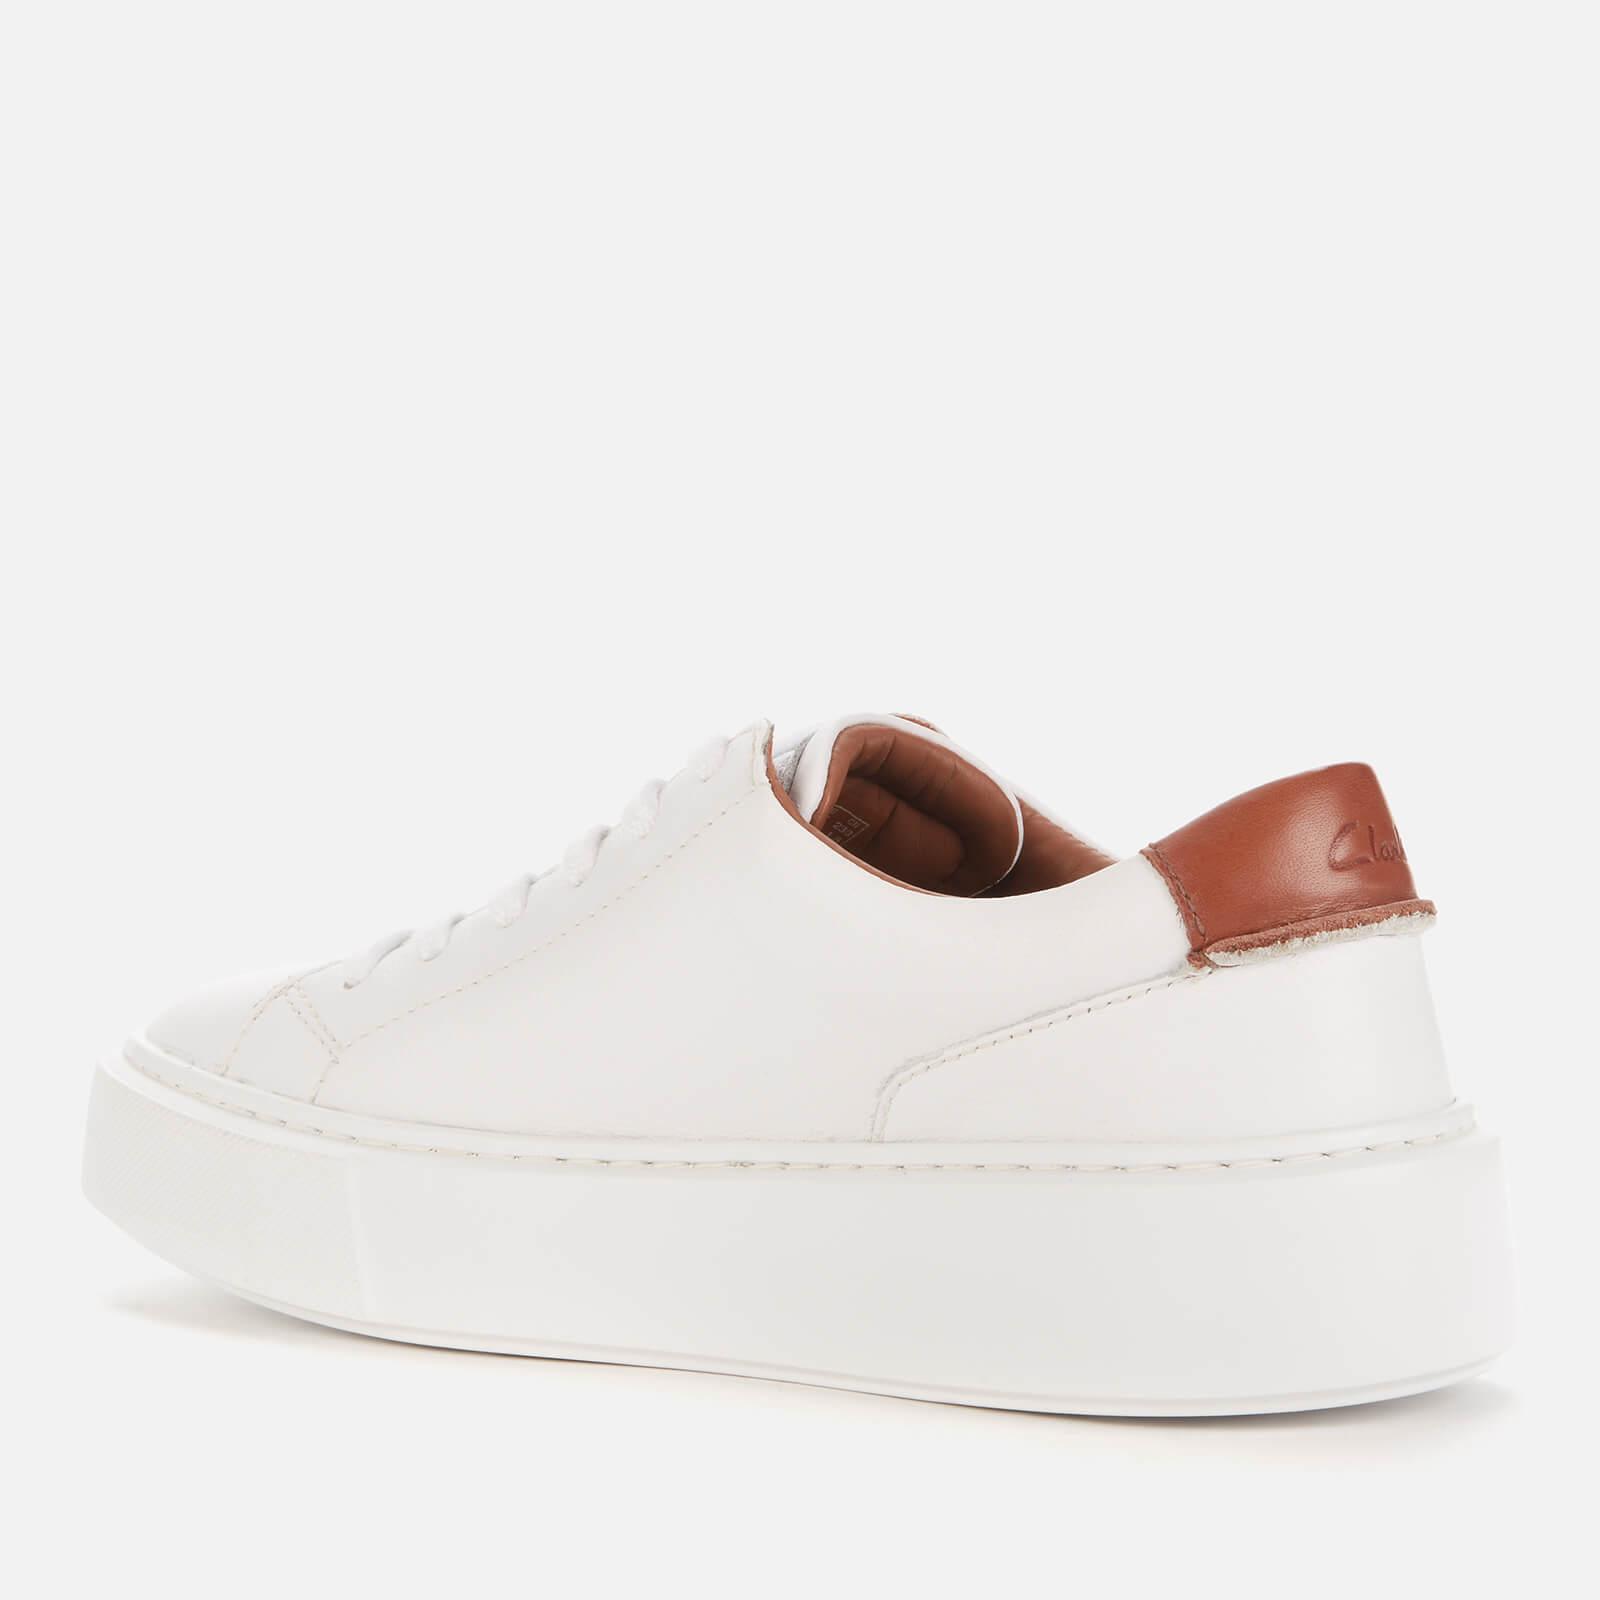 Clarks Hero Lite Lace Leather Flatform Trainers in White | Lyst